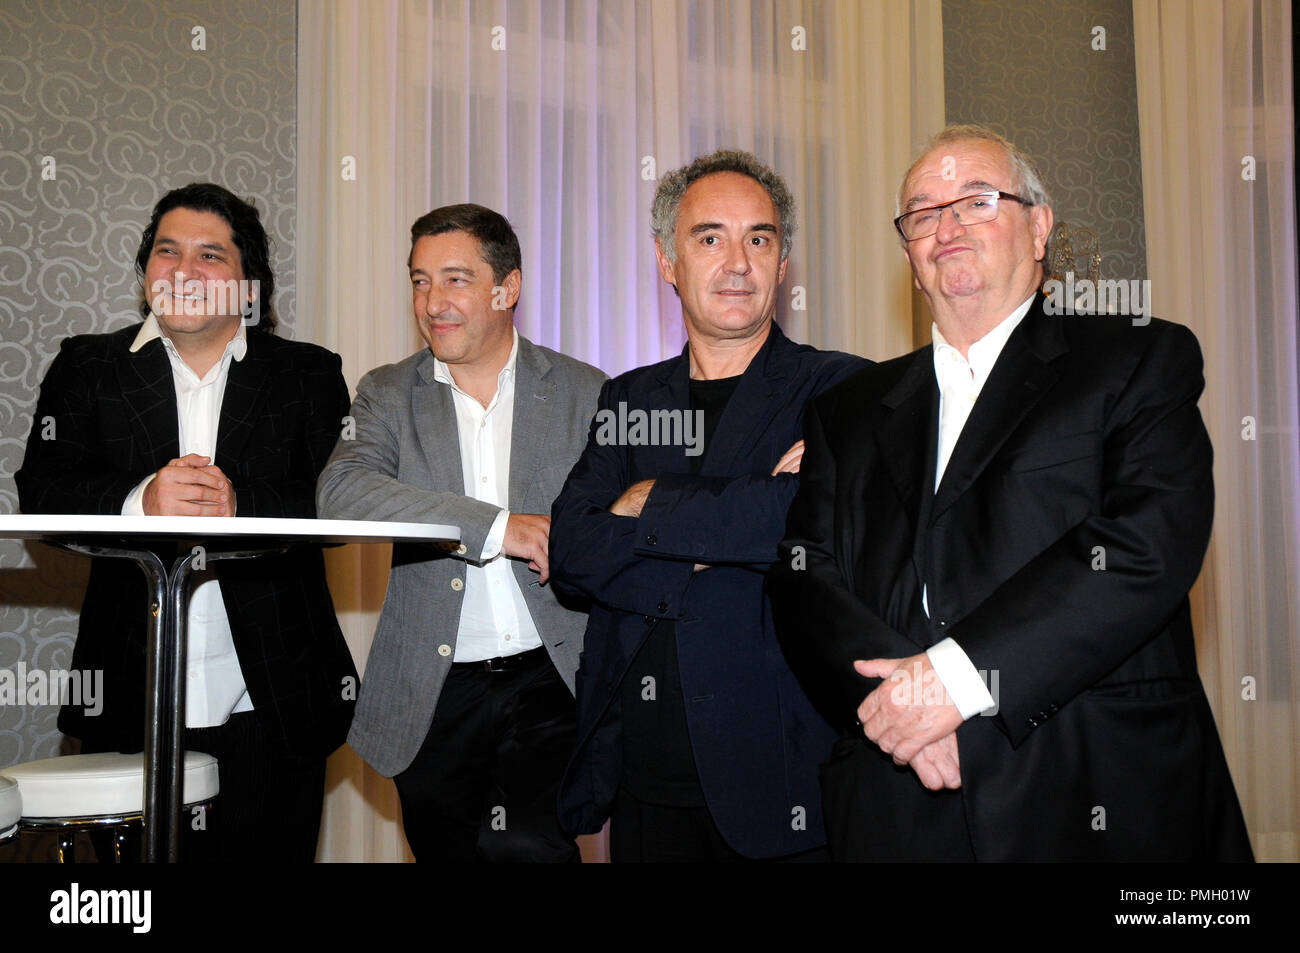 the chefs Ferran Adrià, Gastón Acurio, Juan Mari Arzak and Joan Roca after the presentation for the first time in Spain of the documentary 'Peru Knows. Stock Photo